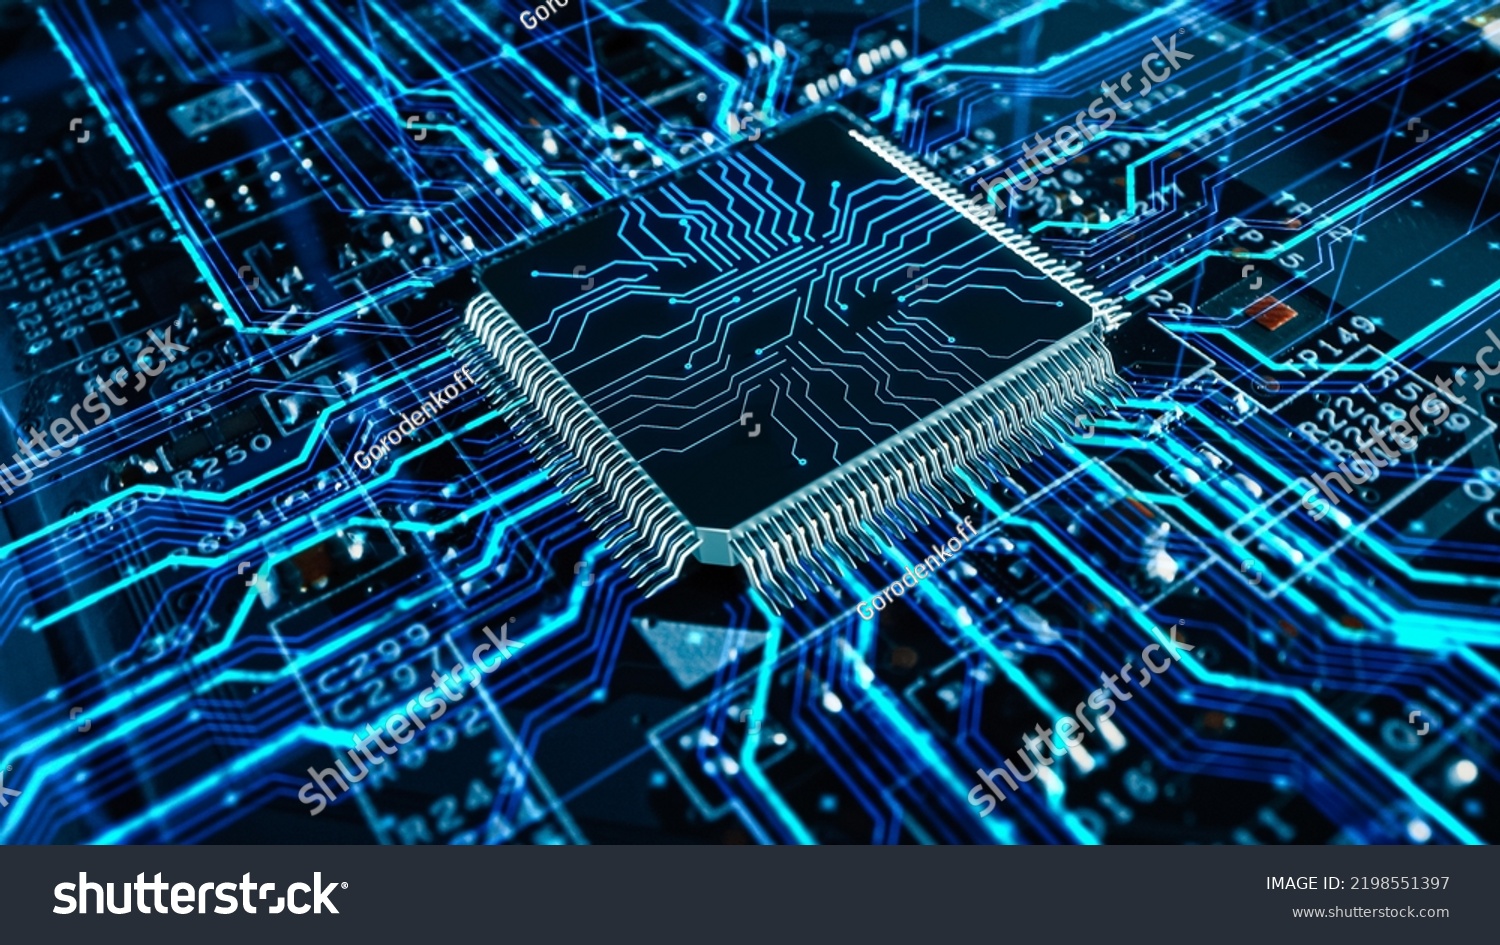 Advanced Technology Concept Visualization: Circuit Board CPU Processor Microchip Starting Artificial Intelligence Digitalization of Neural Networking and Cloud Computing. Digital Lines Move Data #2198551397